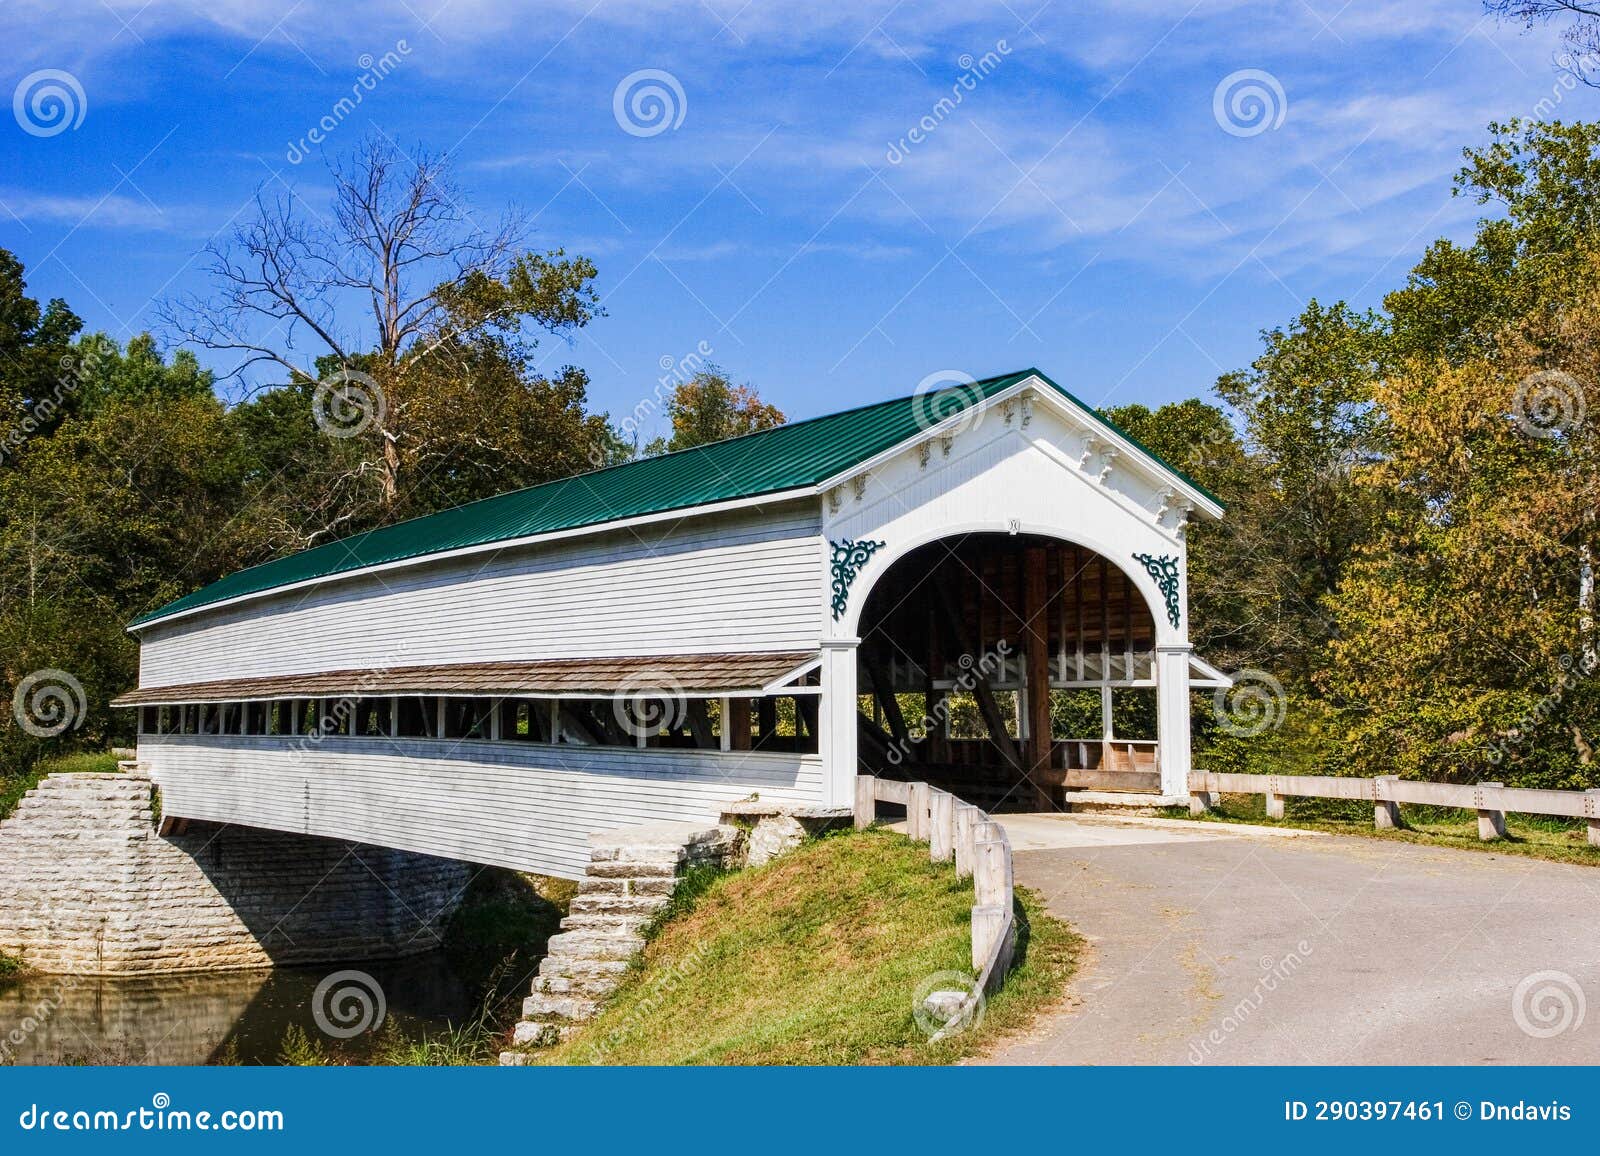 a wooden covered bridge in the countyside of rural america